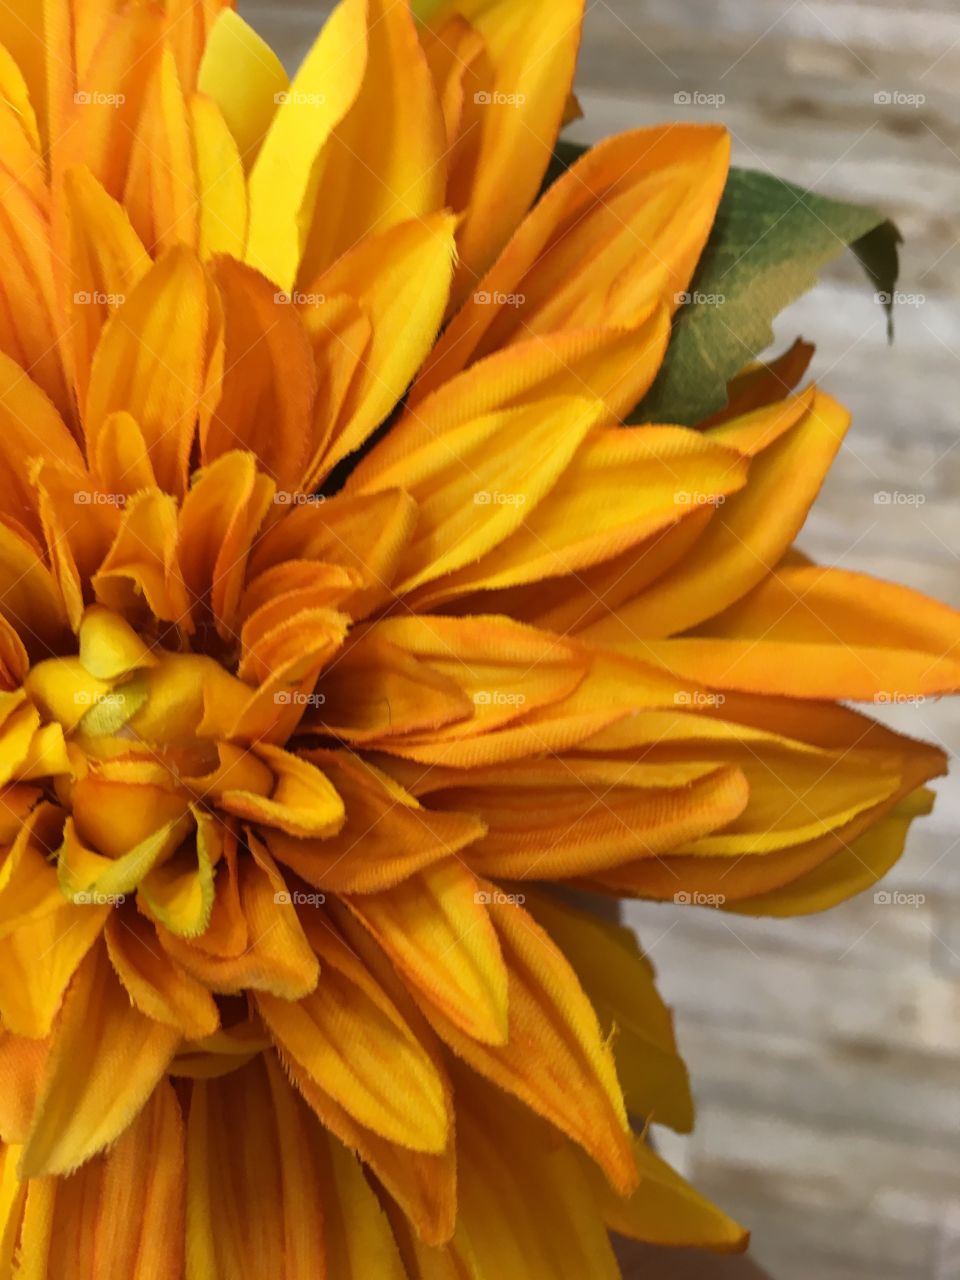 This gorgeous flower represents a yellowish ton of yellow 